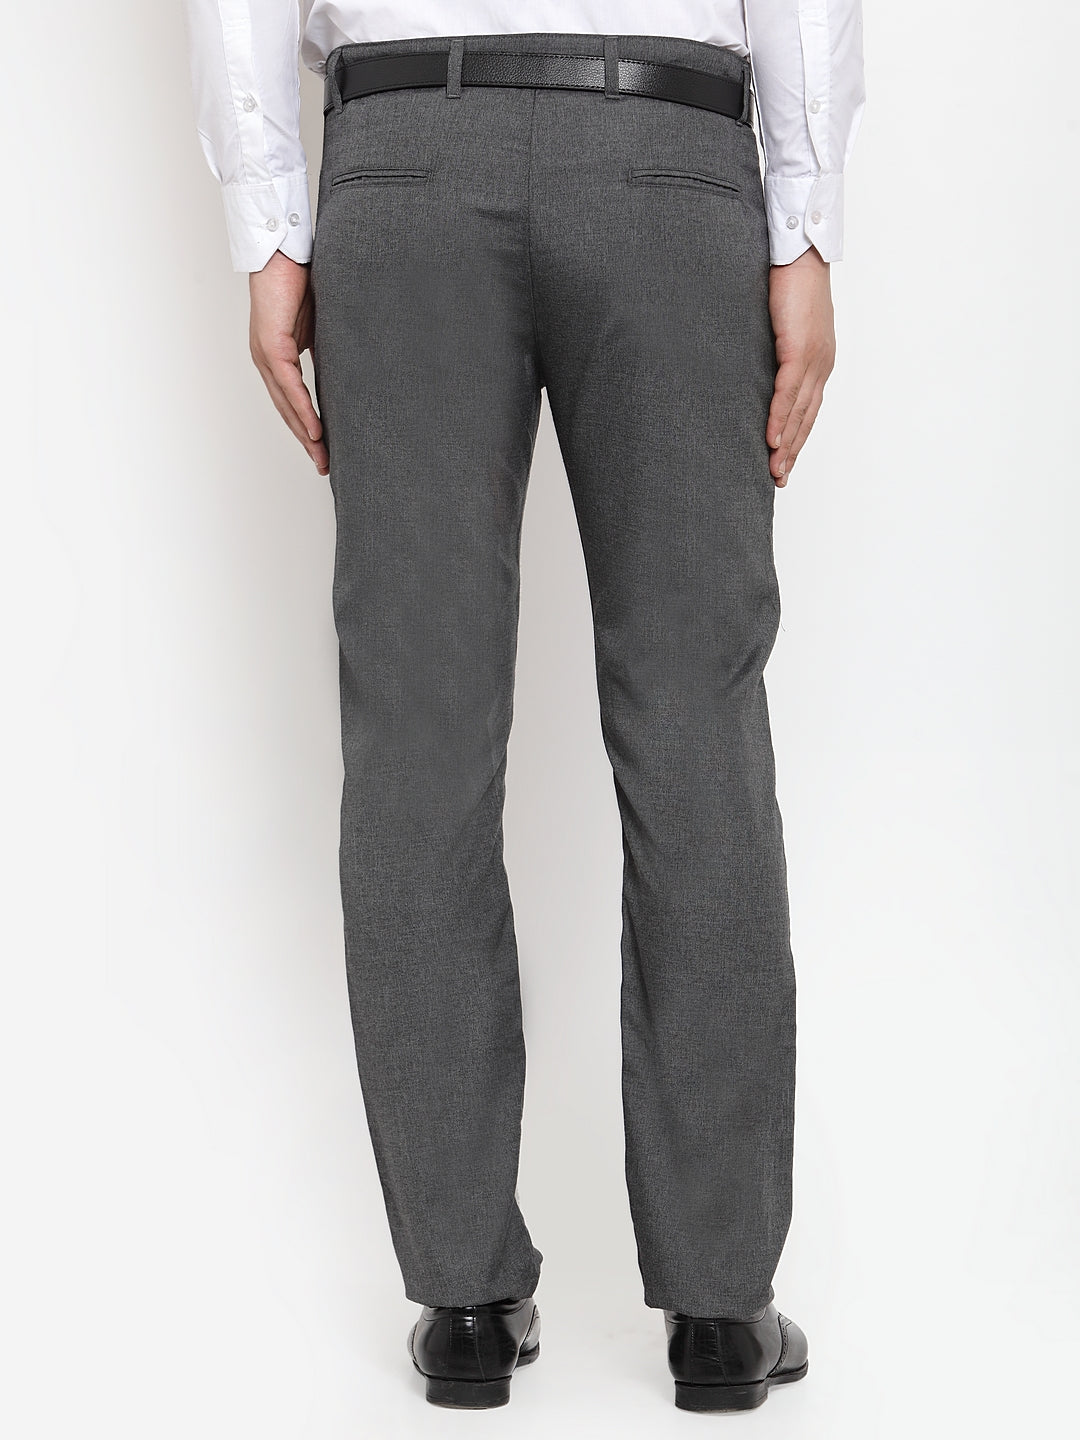 Men's Grey Polyester Handwoven Trousers